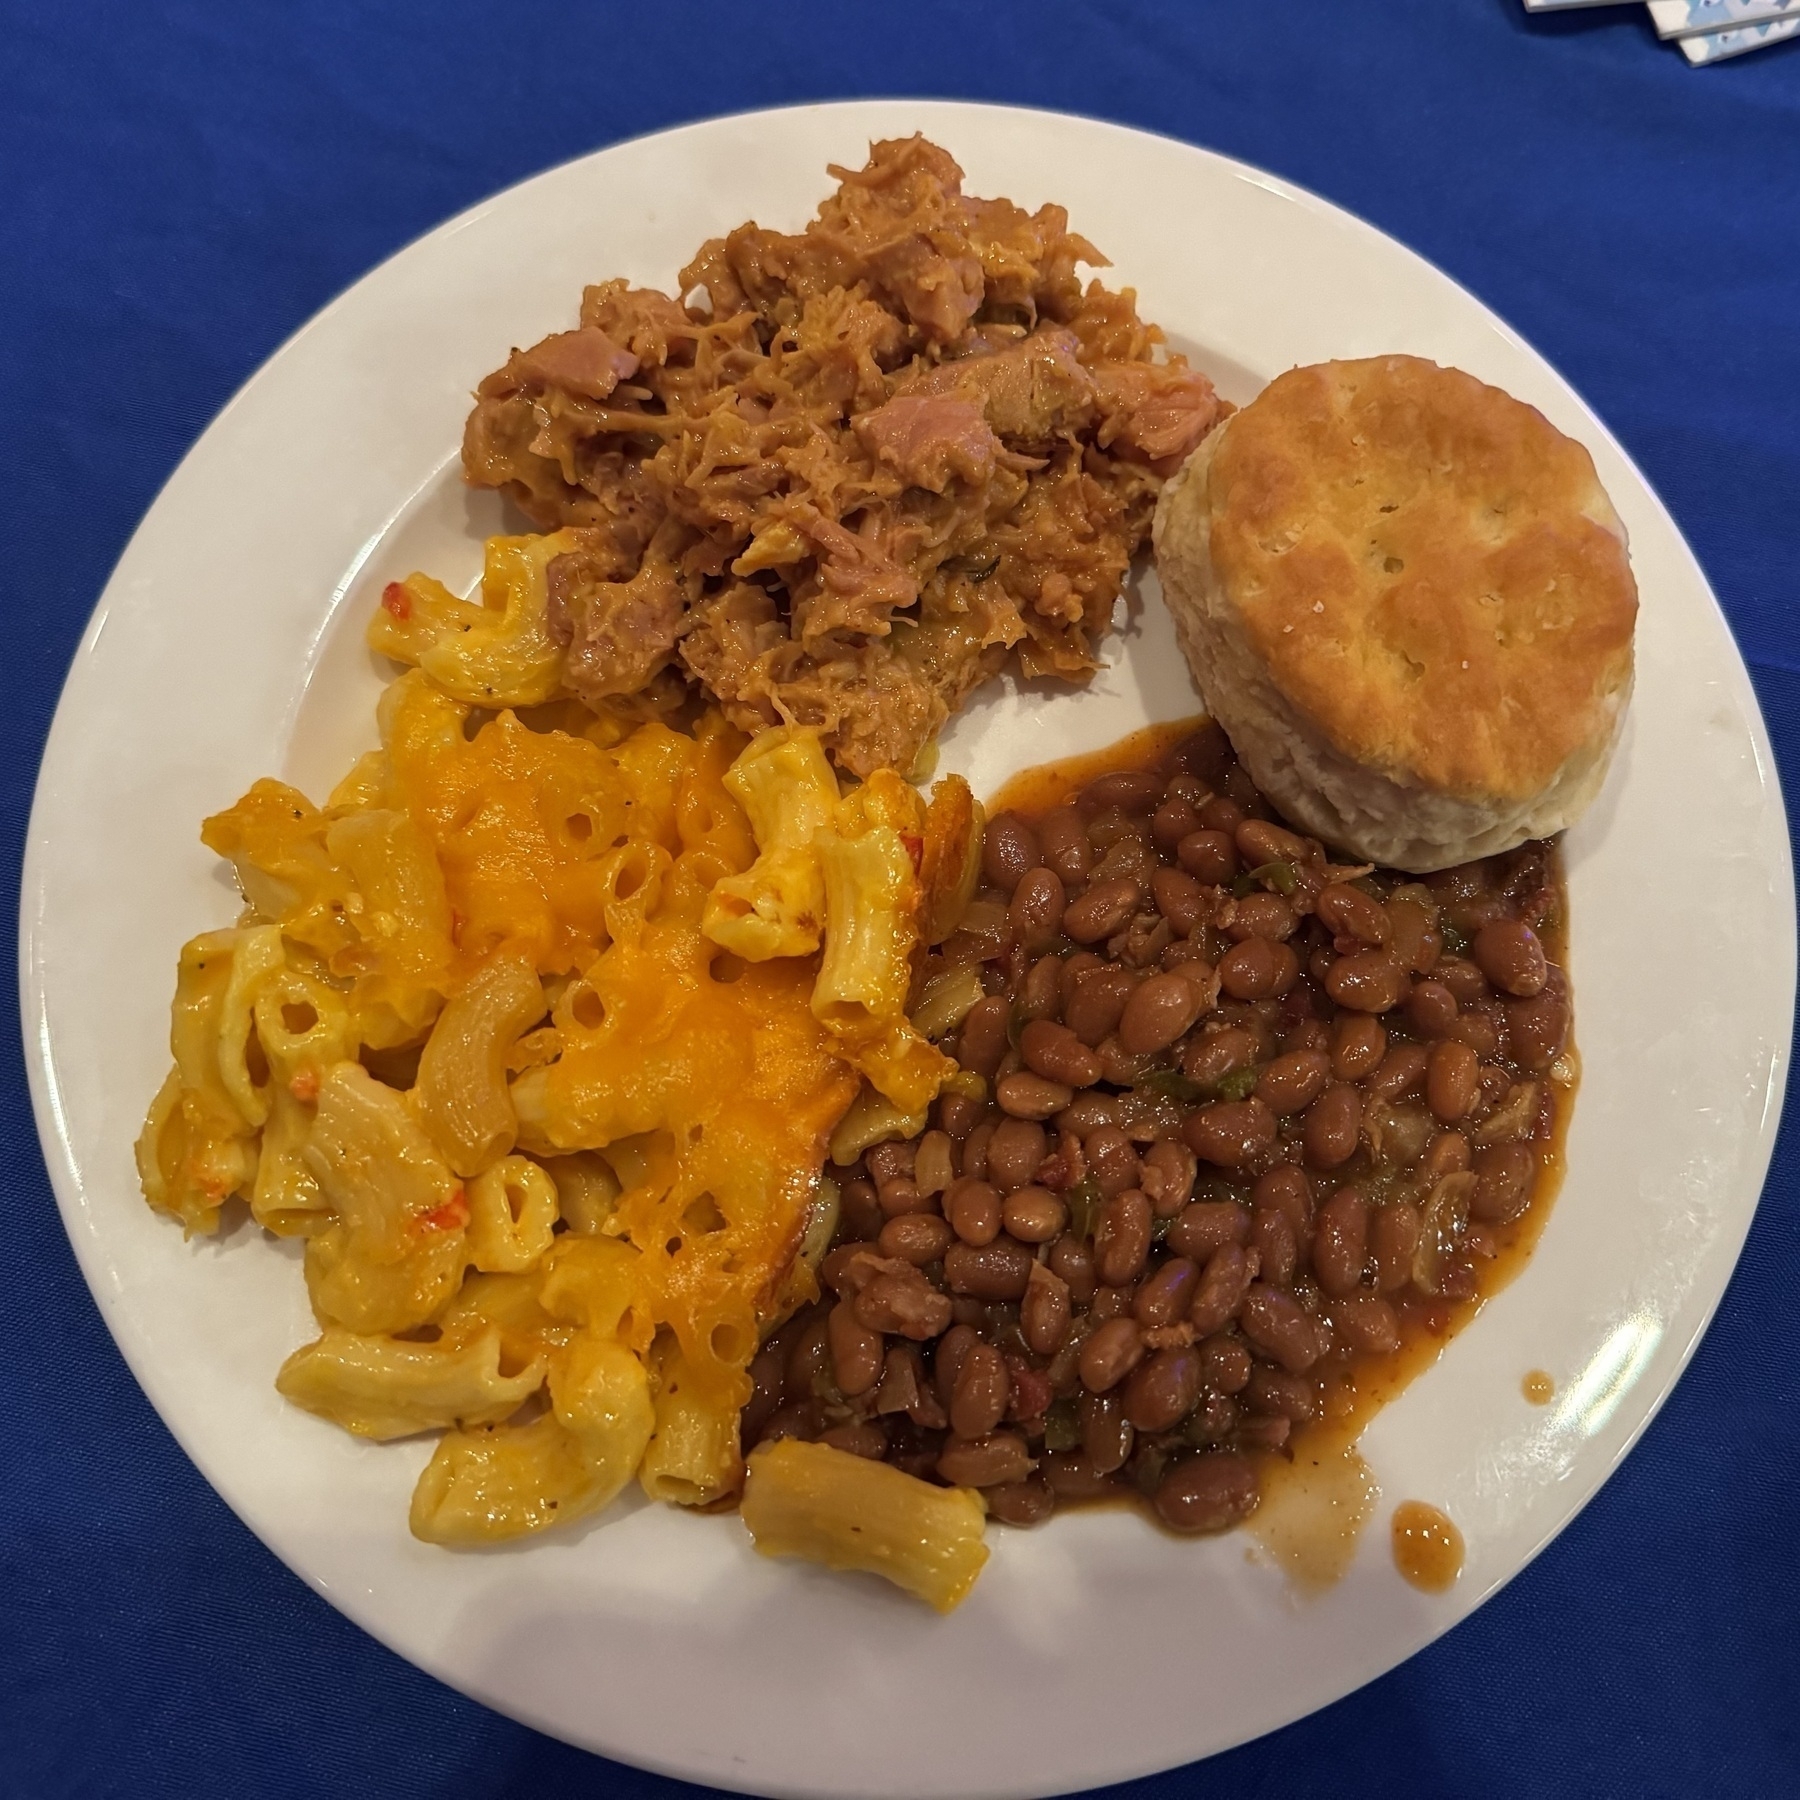 A plate of macaroni and cheese, pulled pork, baked beans, and a biscuit on a blue table cloth. The joke is that all the food is yellow, white, or brown.